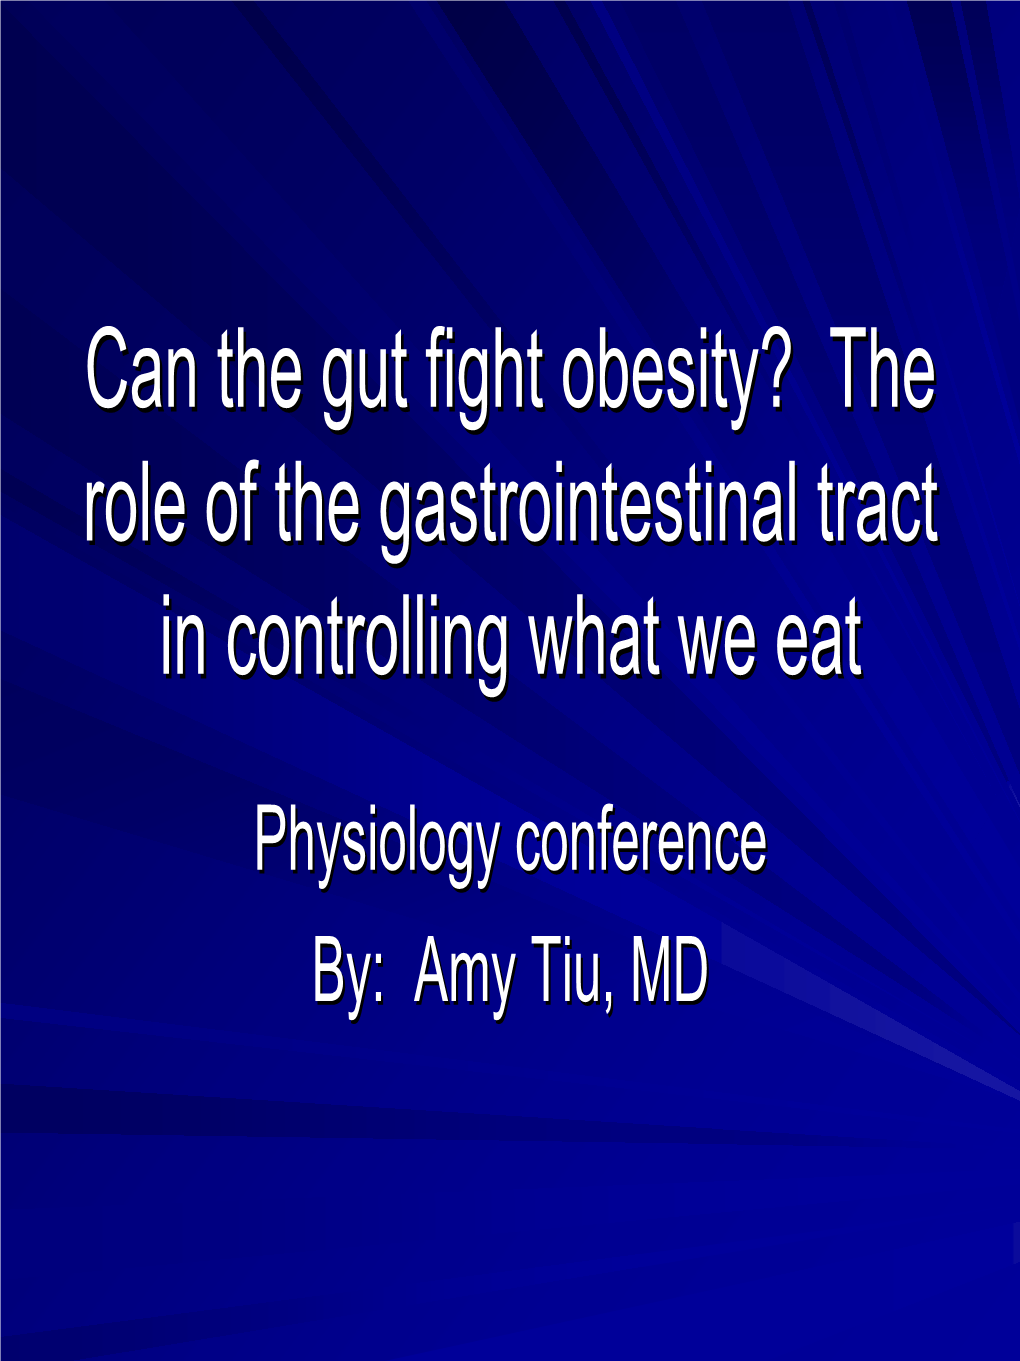 Appetite Control: the Role of the Gastrointestinal Tract